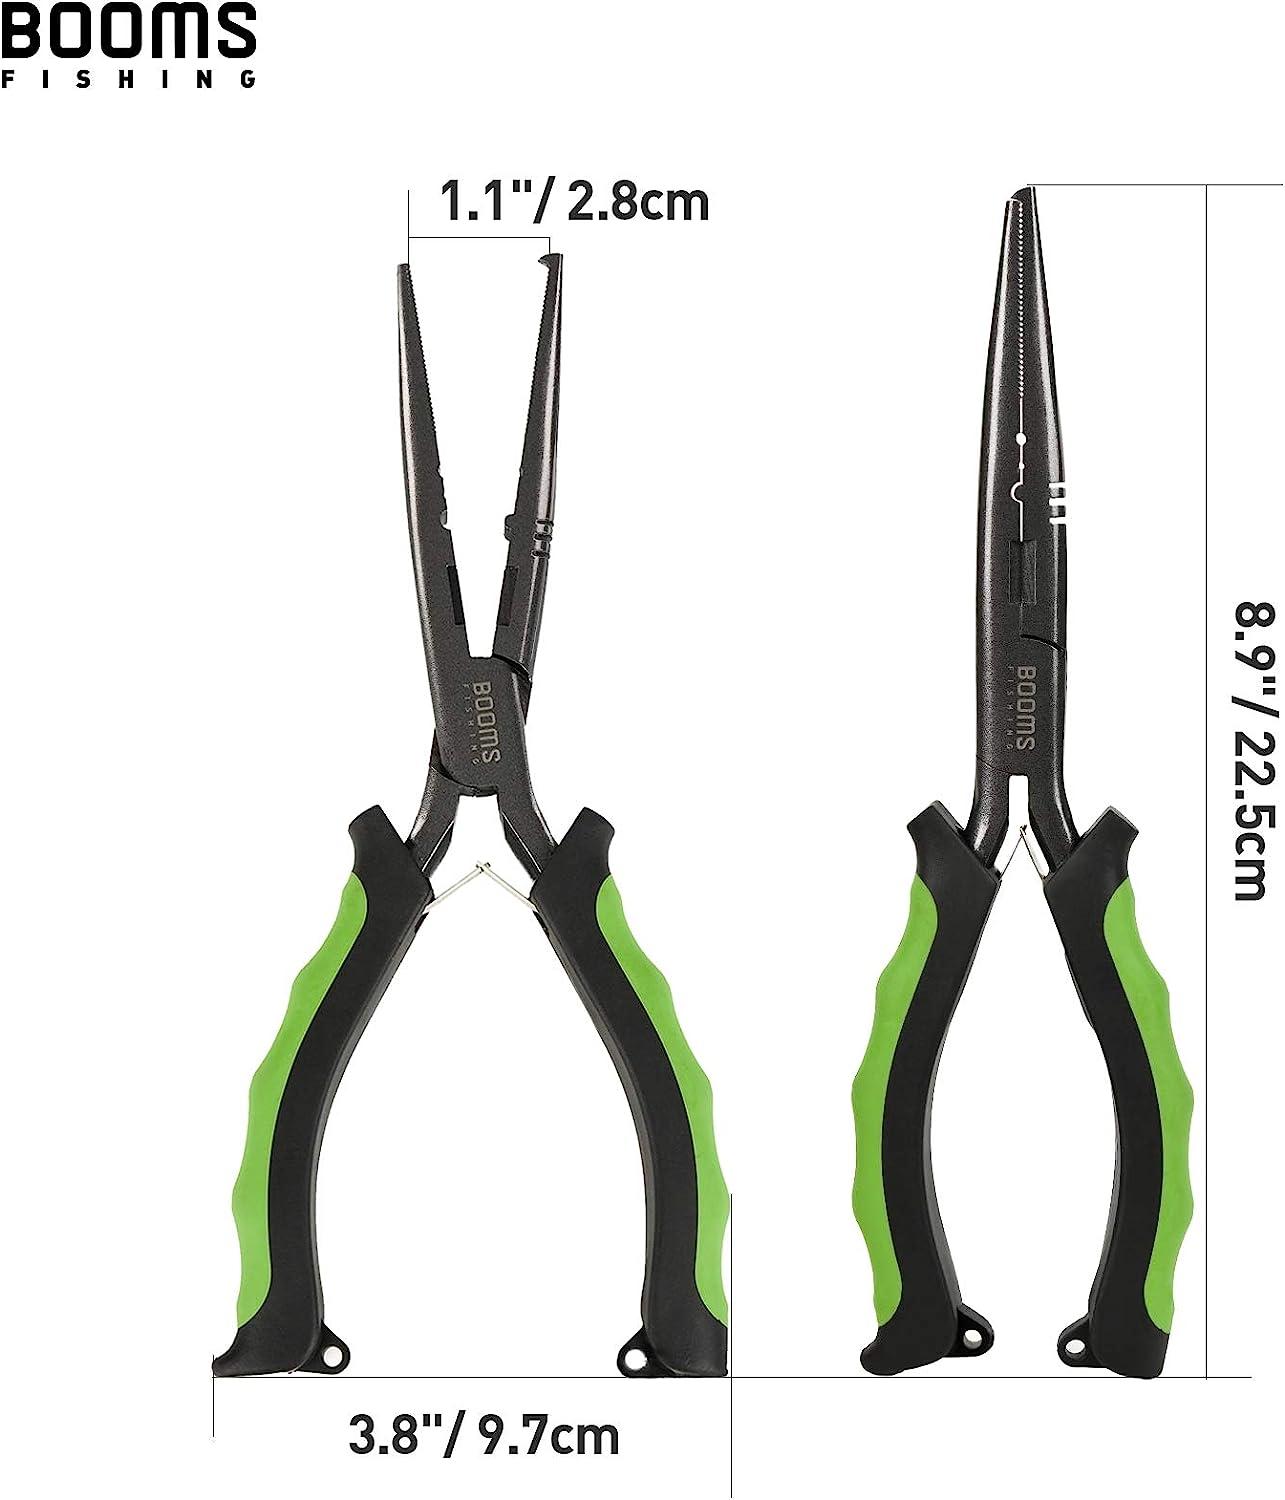 Booms Fishing F03 Needle Nose Fishing Pliers, 7 or 9 Fisherman's